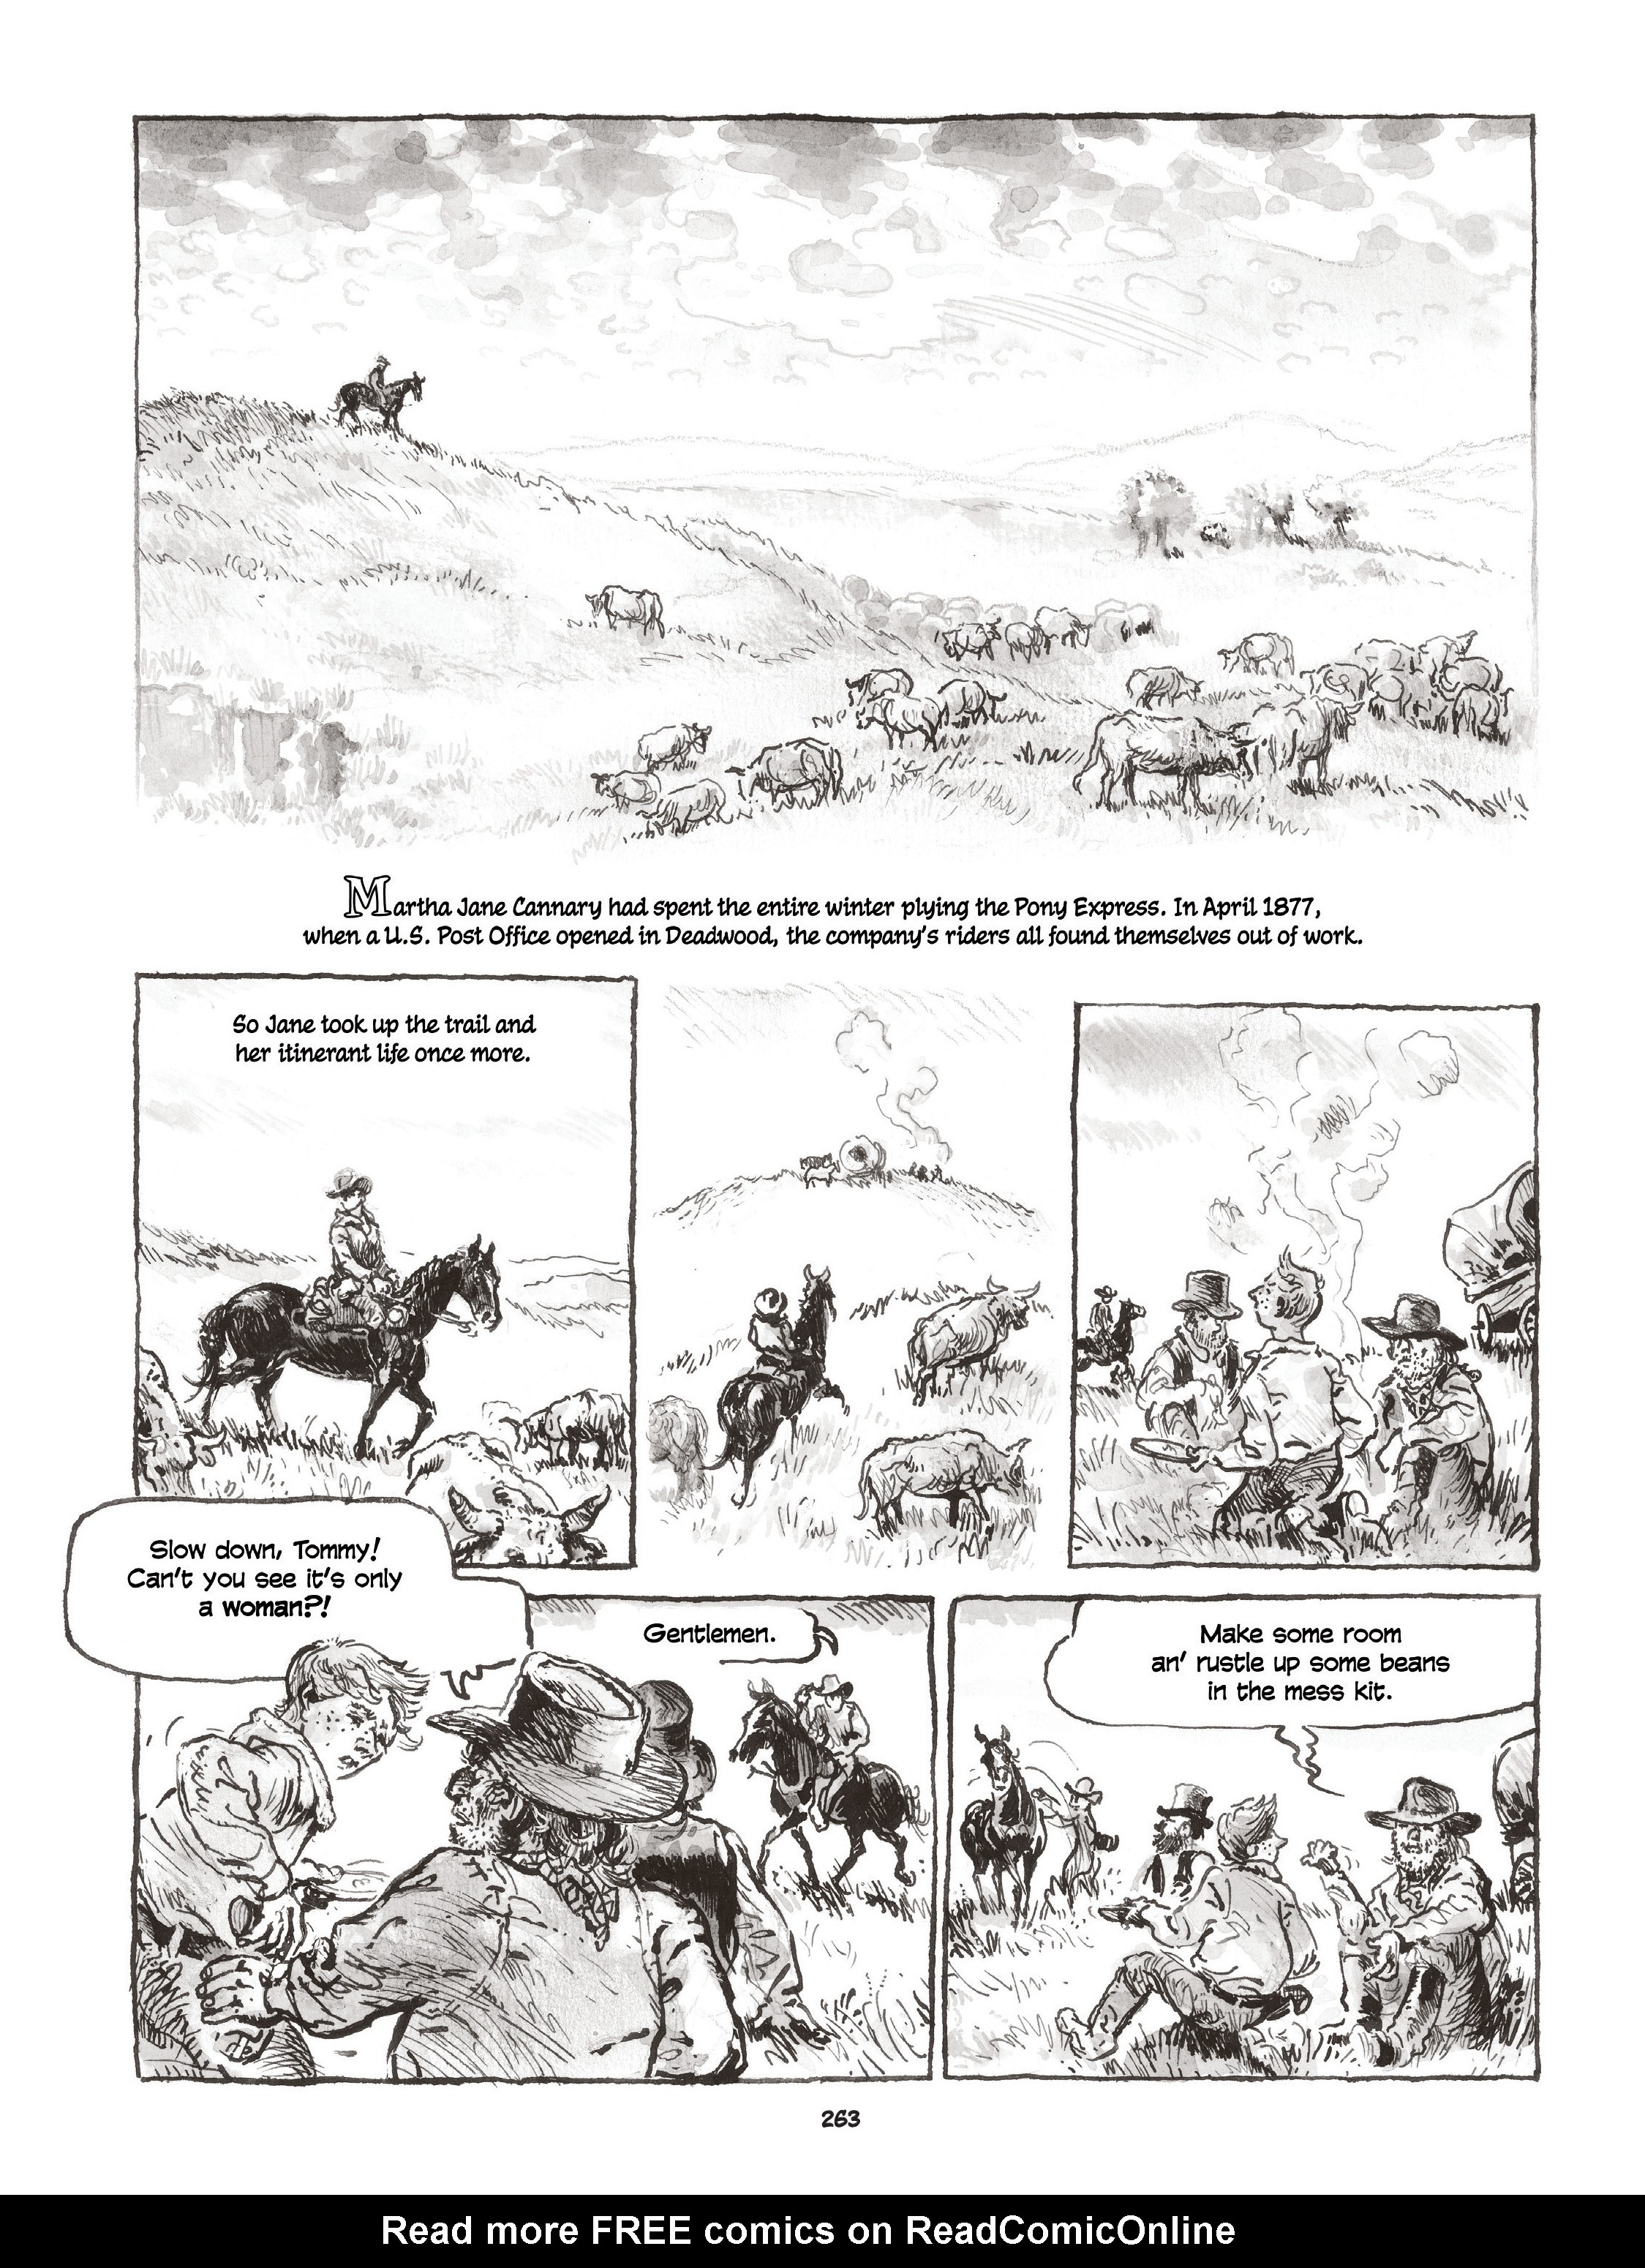 Read online Calamity Jane: The Calamitous Life of Martha Jane Cannary comic -  Issue # TPB (Part 3) - 60